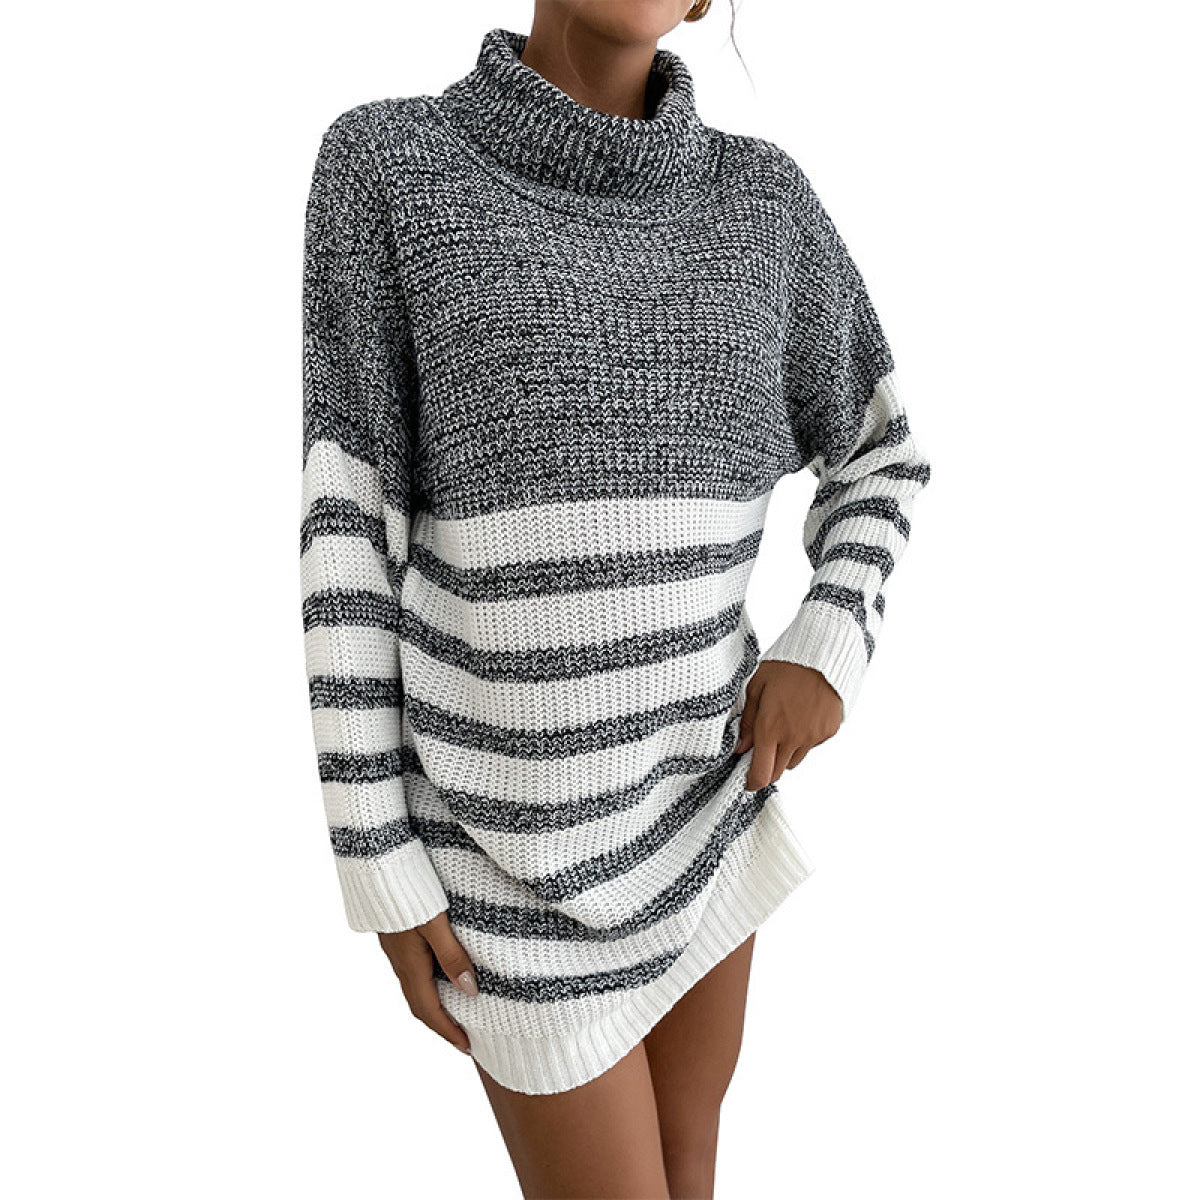 Turtleneck Long Sleeve Knitted Colorblock Sweater Dress